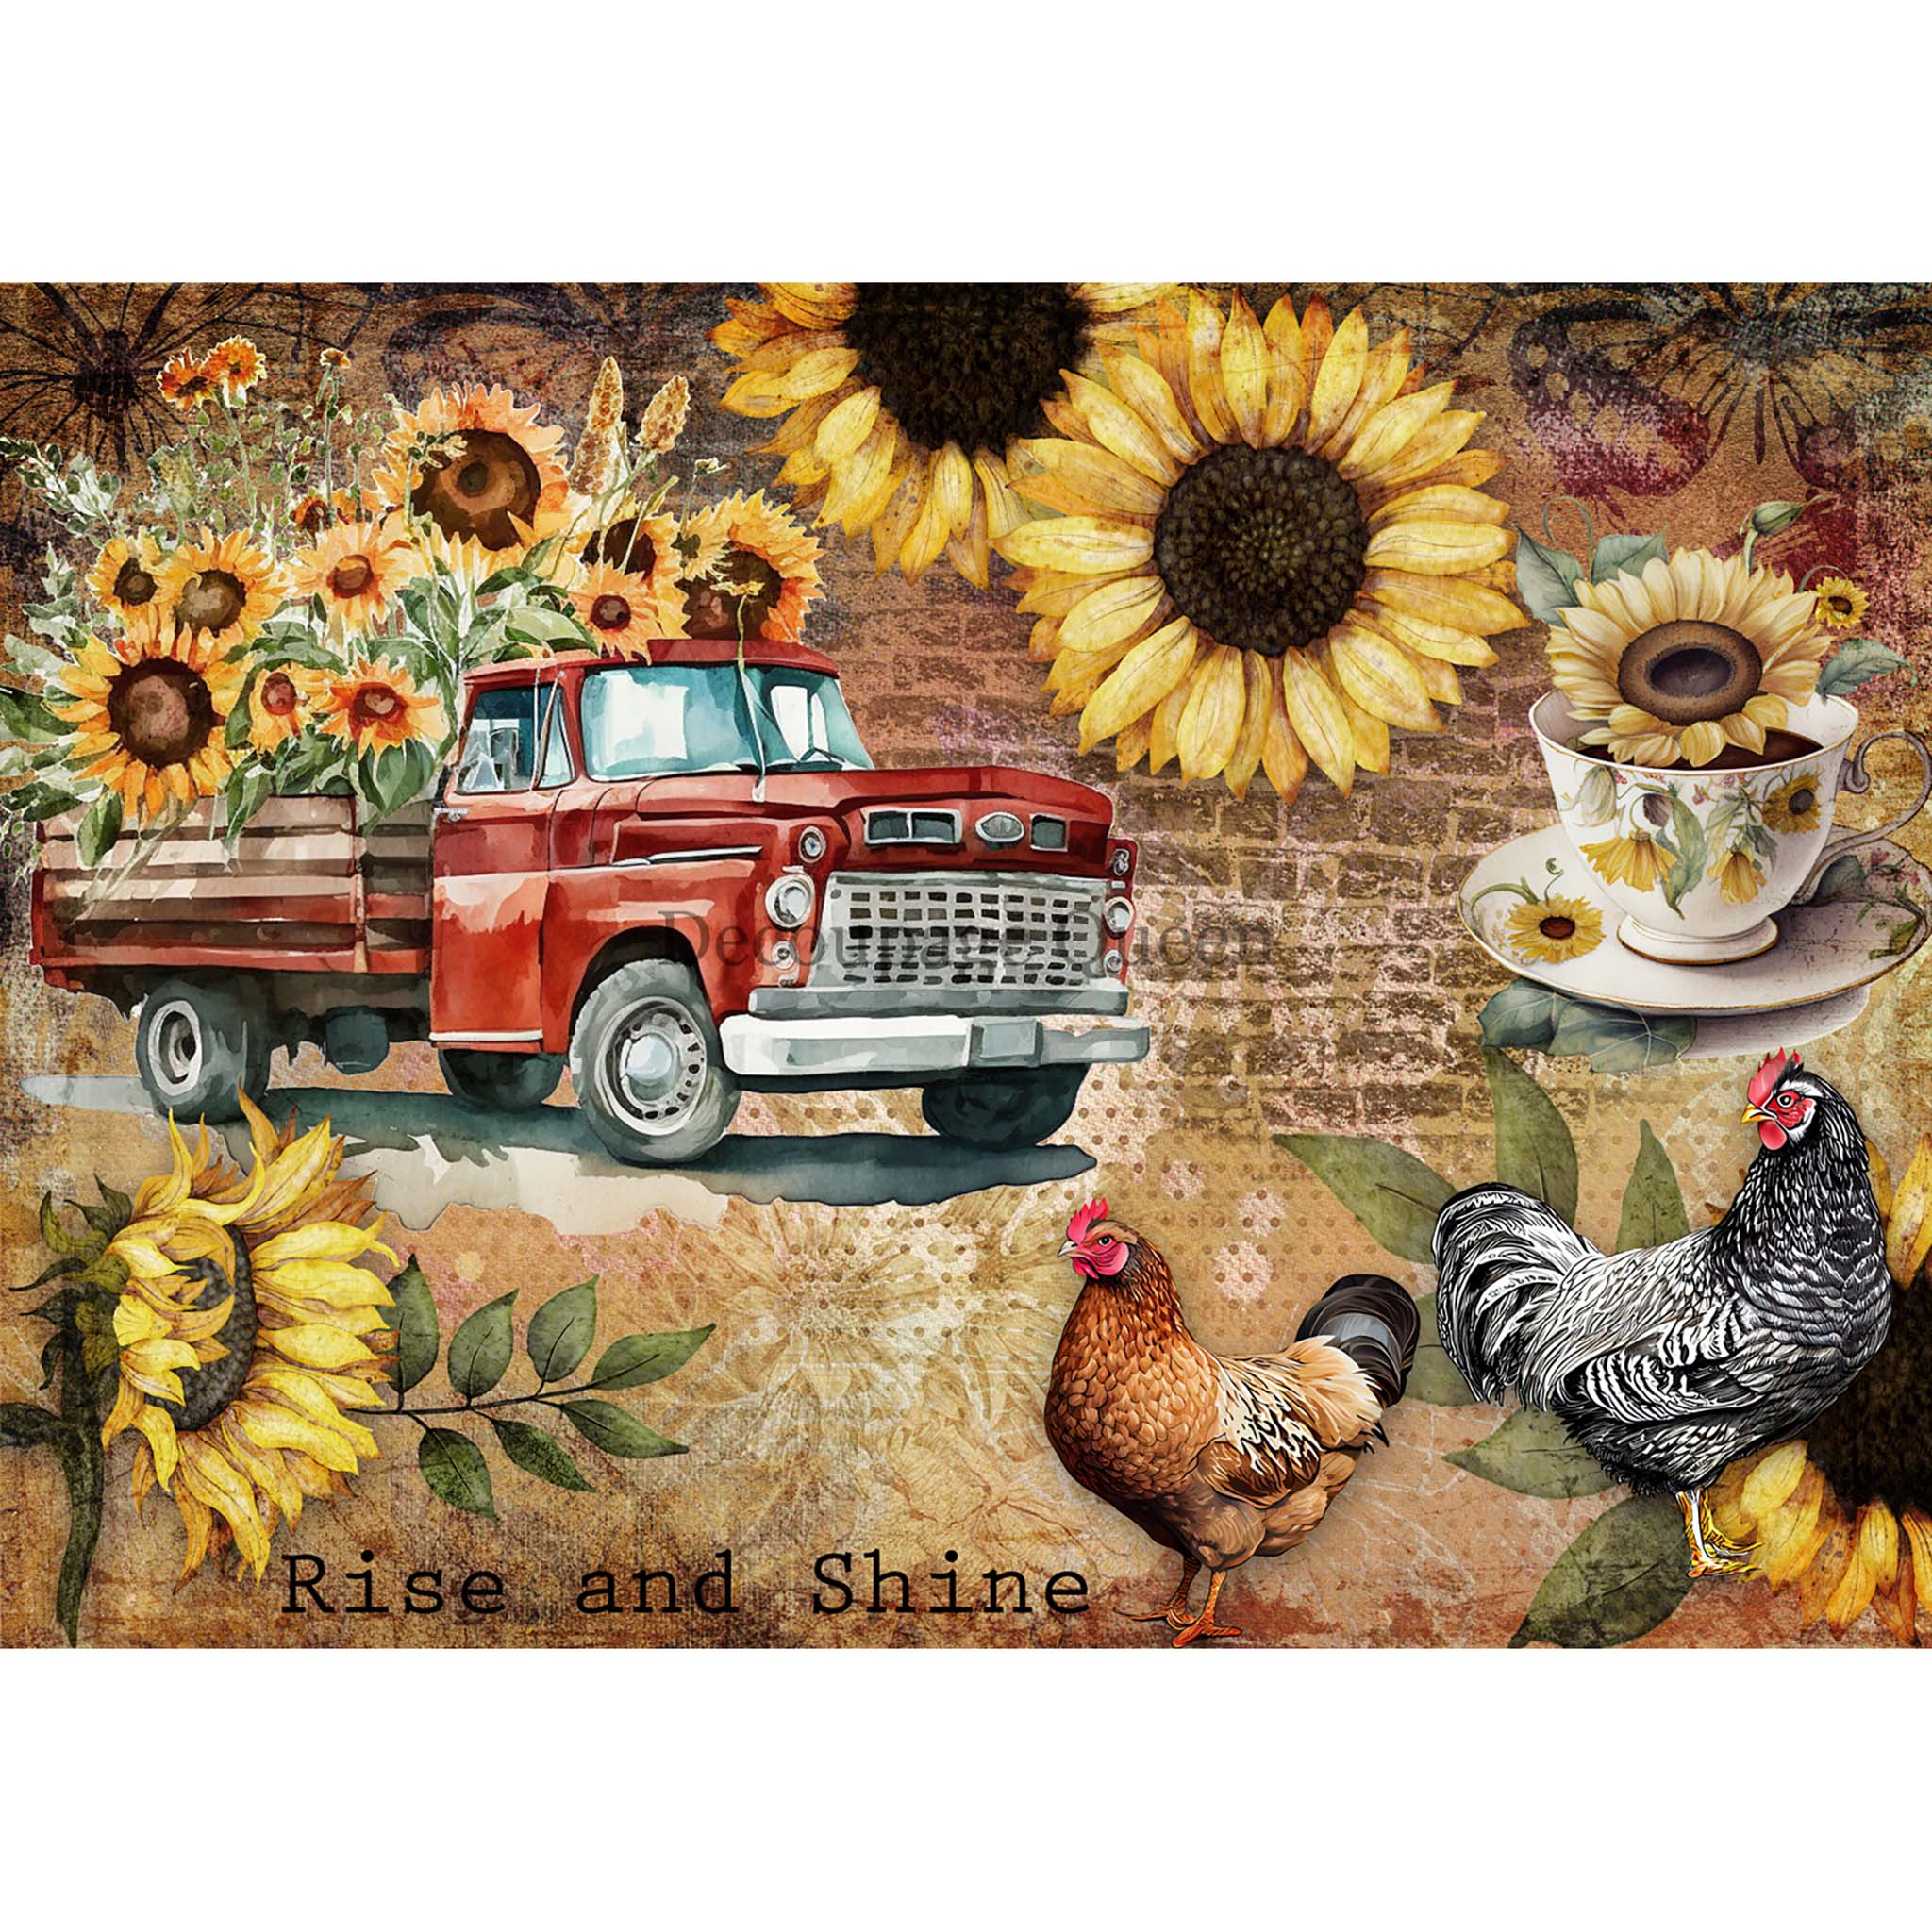 A1 rice paper design that features a collage of a vintage red farm truck, chickens, sunflowers, and a teacup against a faded brick background.  White borders are on the top and bottom.